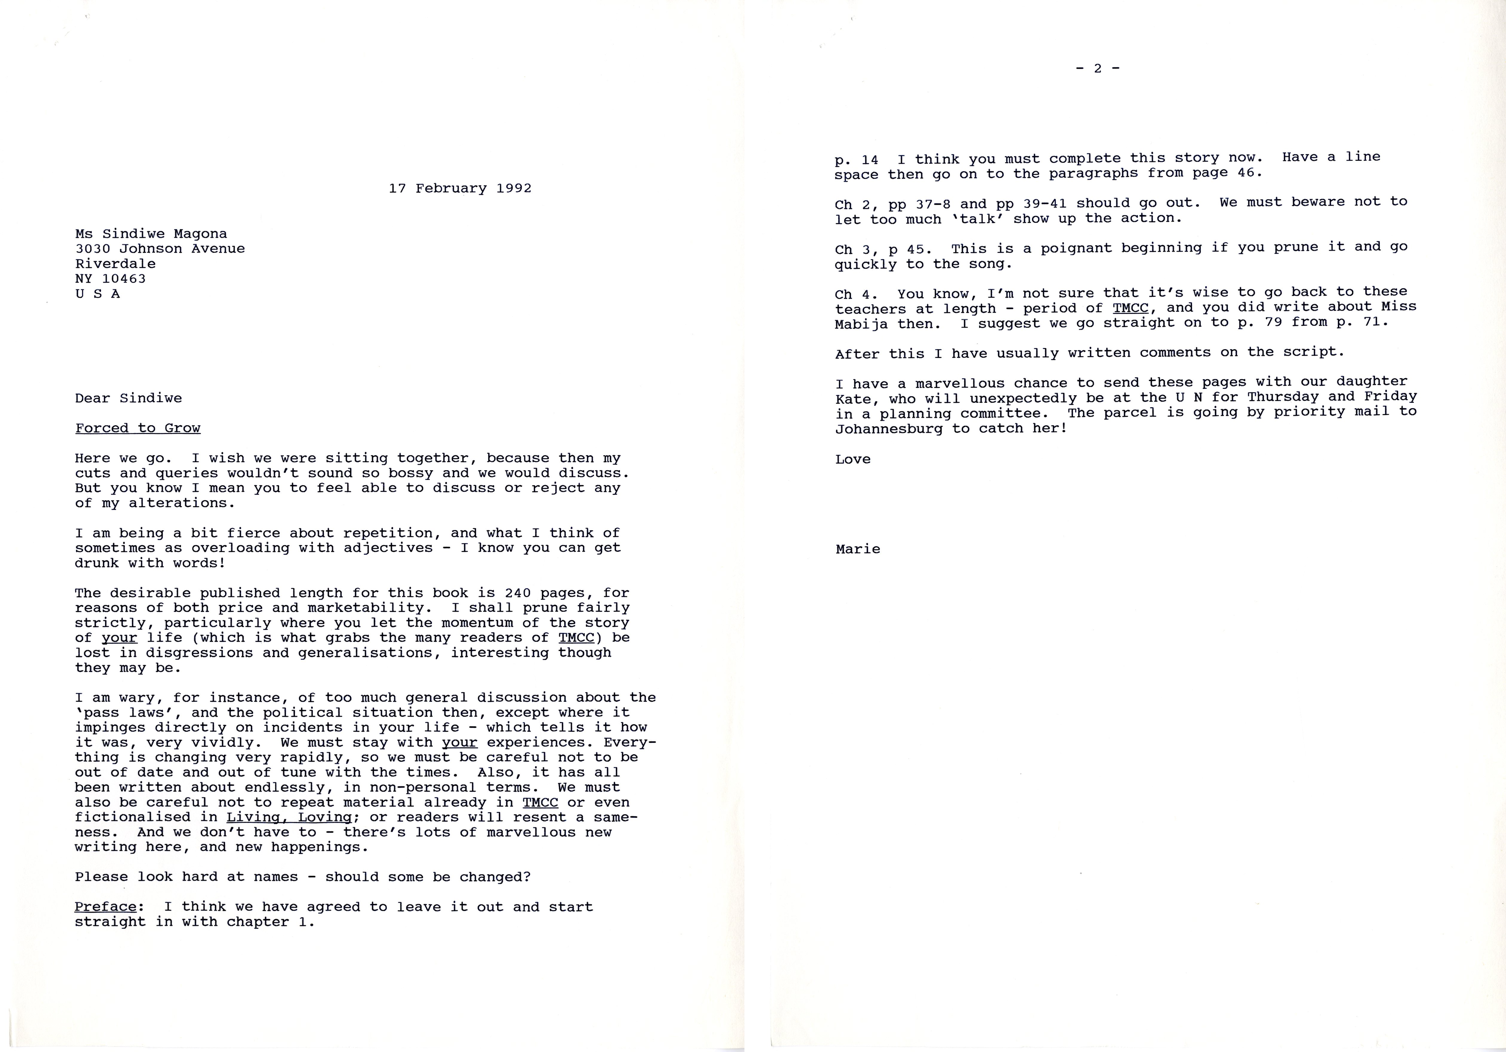 Letter from Magona’s publisher Marie Phillip with corrections for Magona’s second autobiography <em>Forced to Grow</em>.